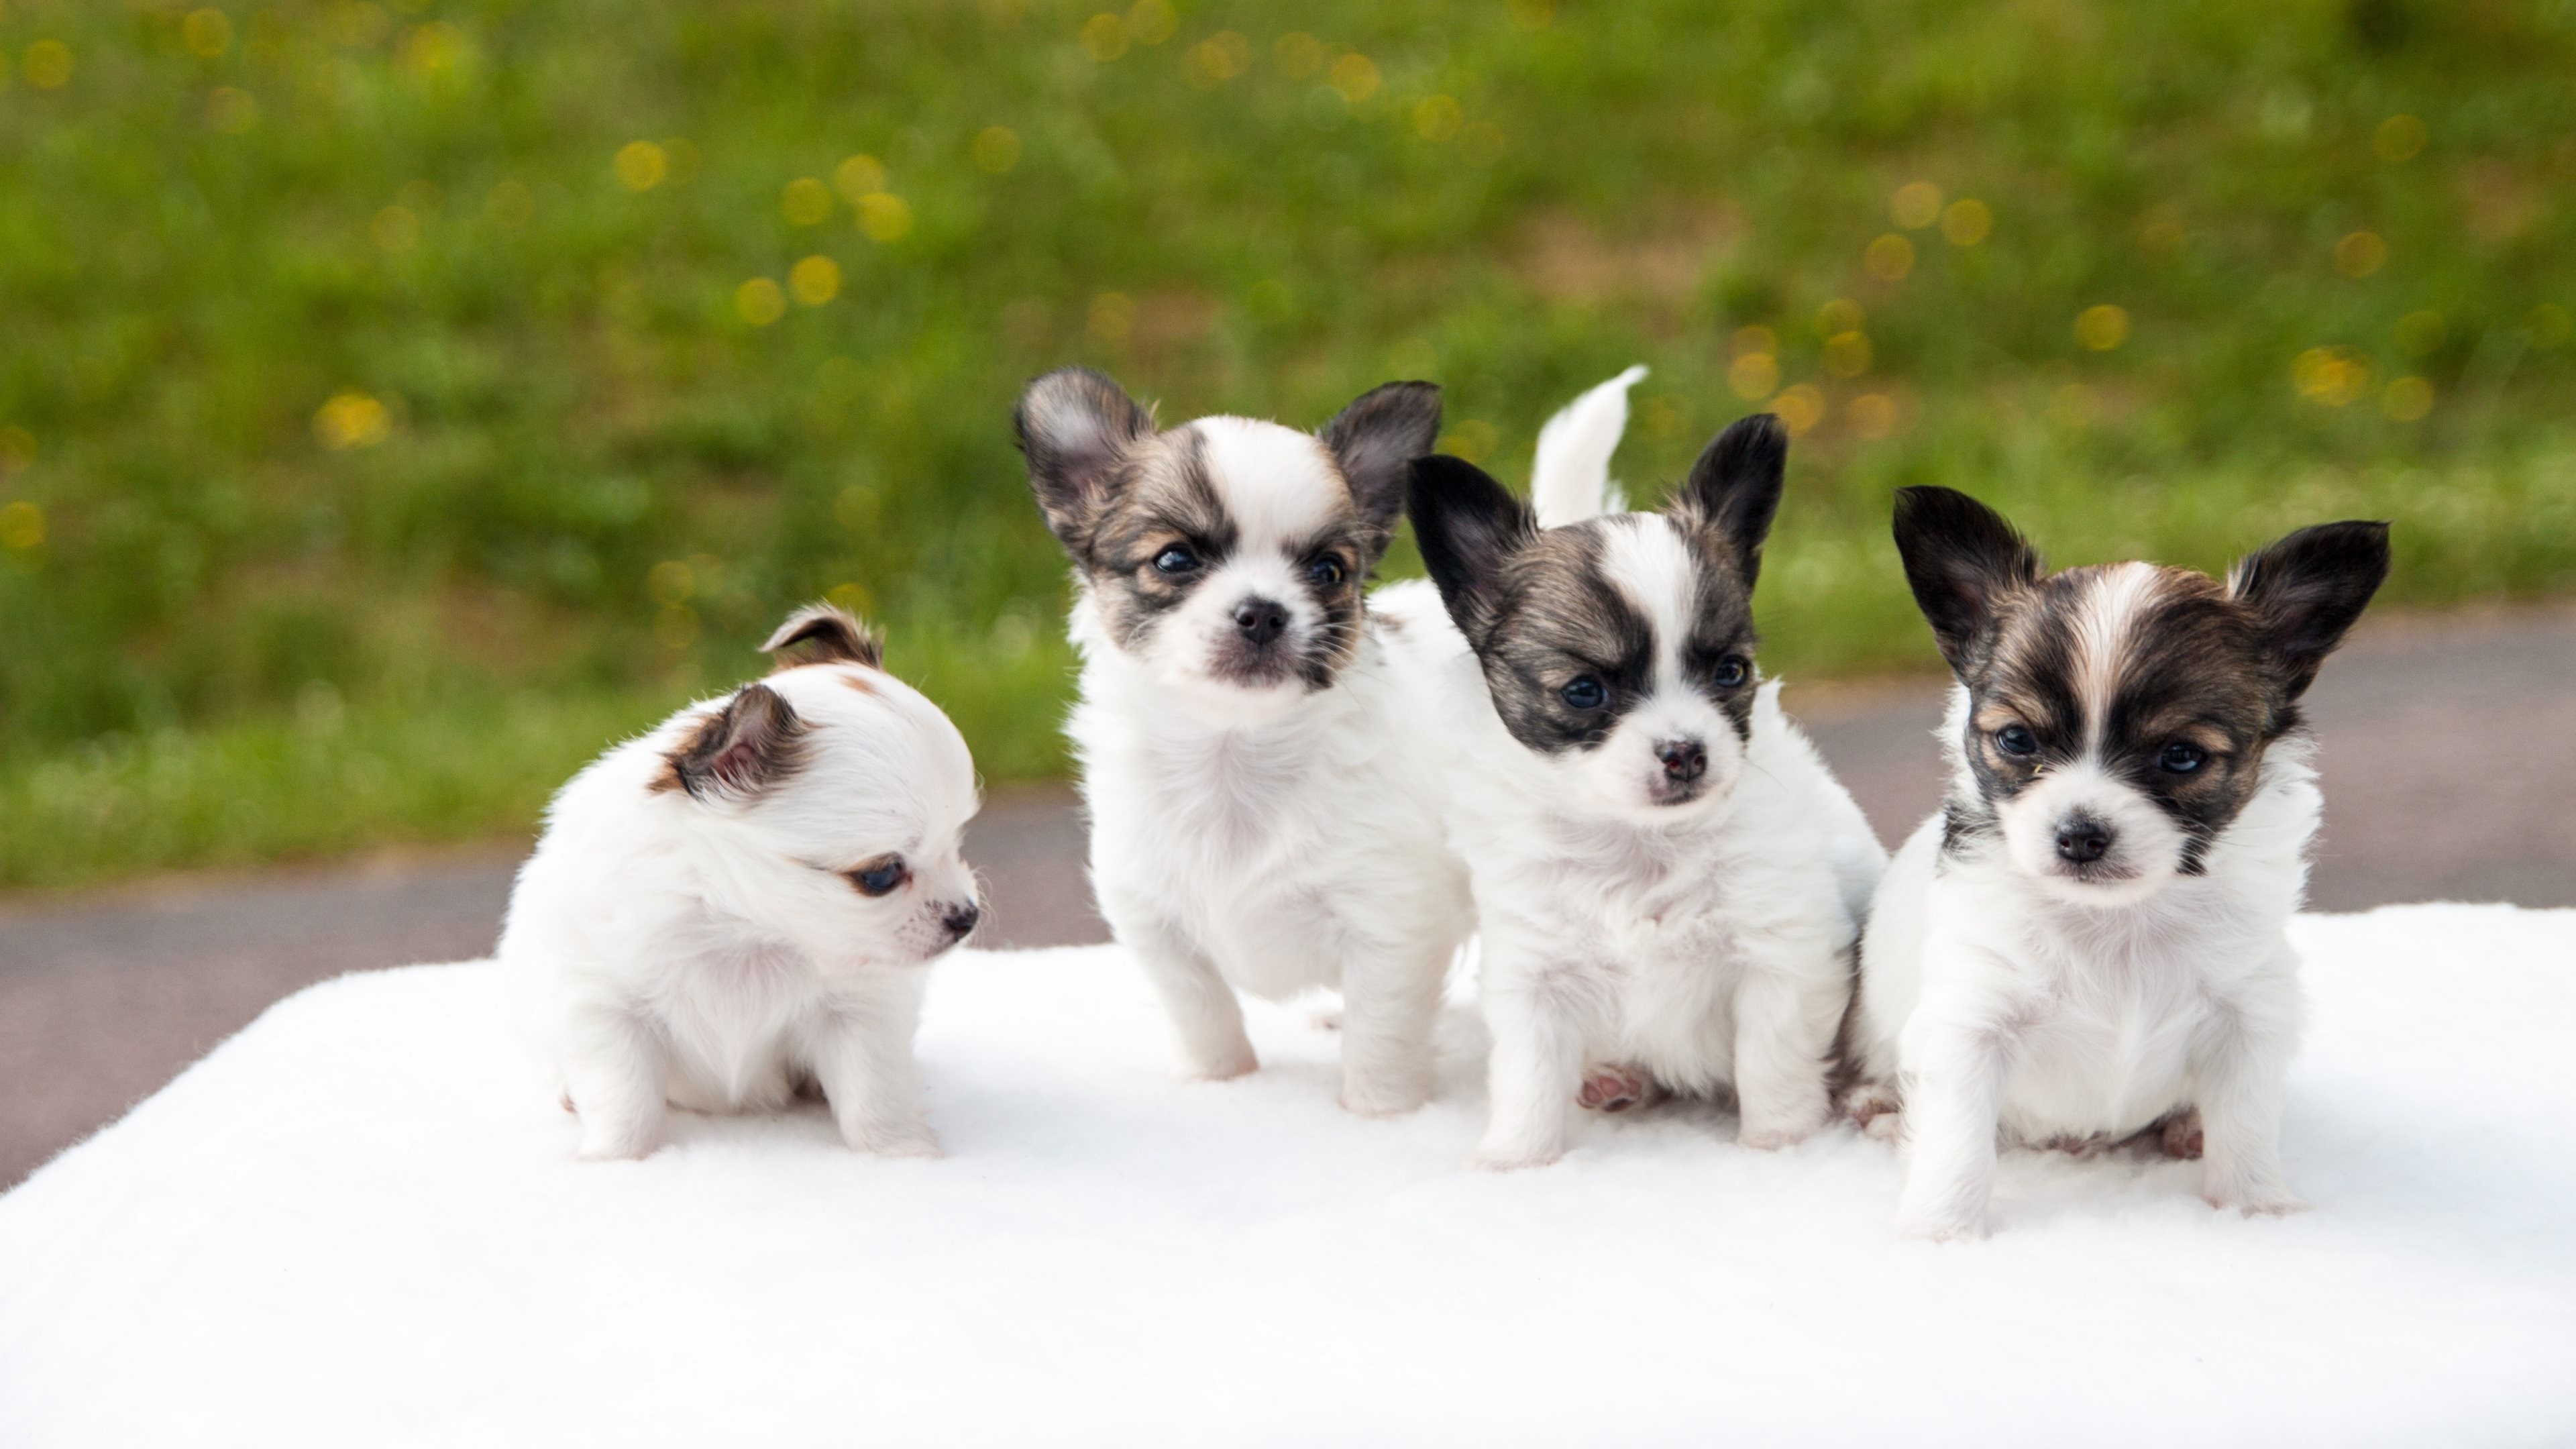 3840x2160 Newest Chihuahua Dogs Wallpapers in High Quality, Mat Kiefer